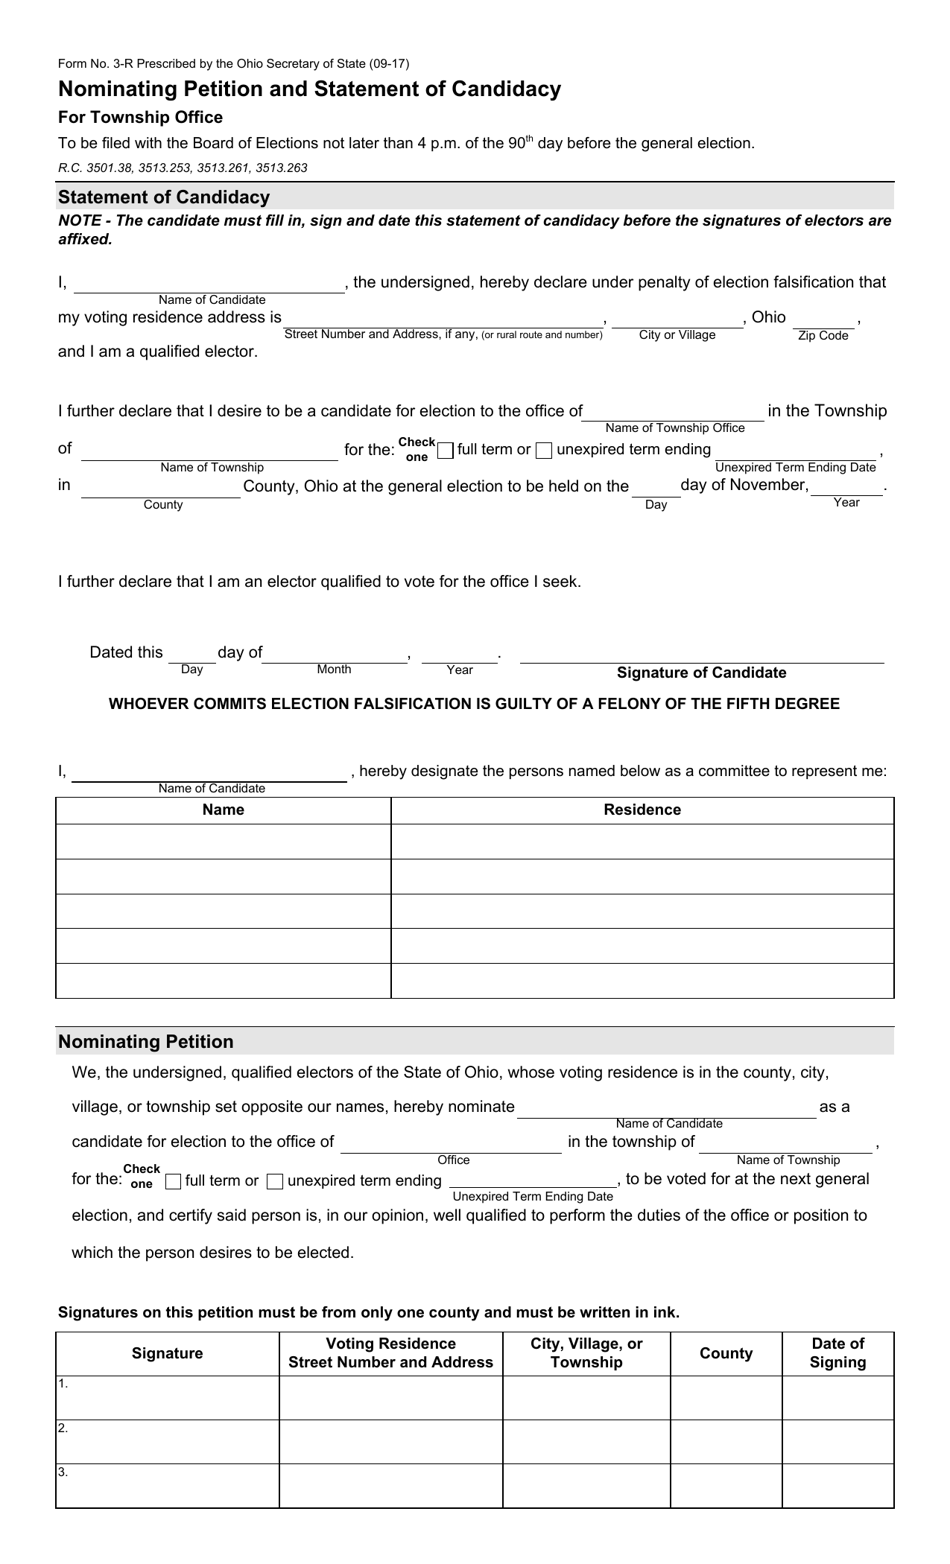 Form 3-R Nominating Petition and Statement of Candidacy for Township Office - Ohio, Page 1